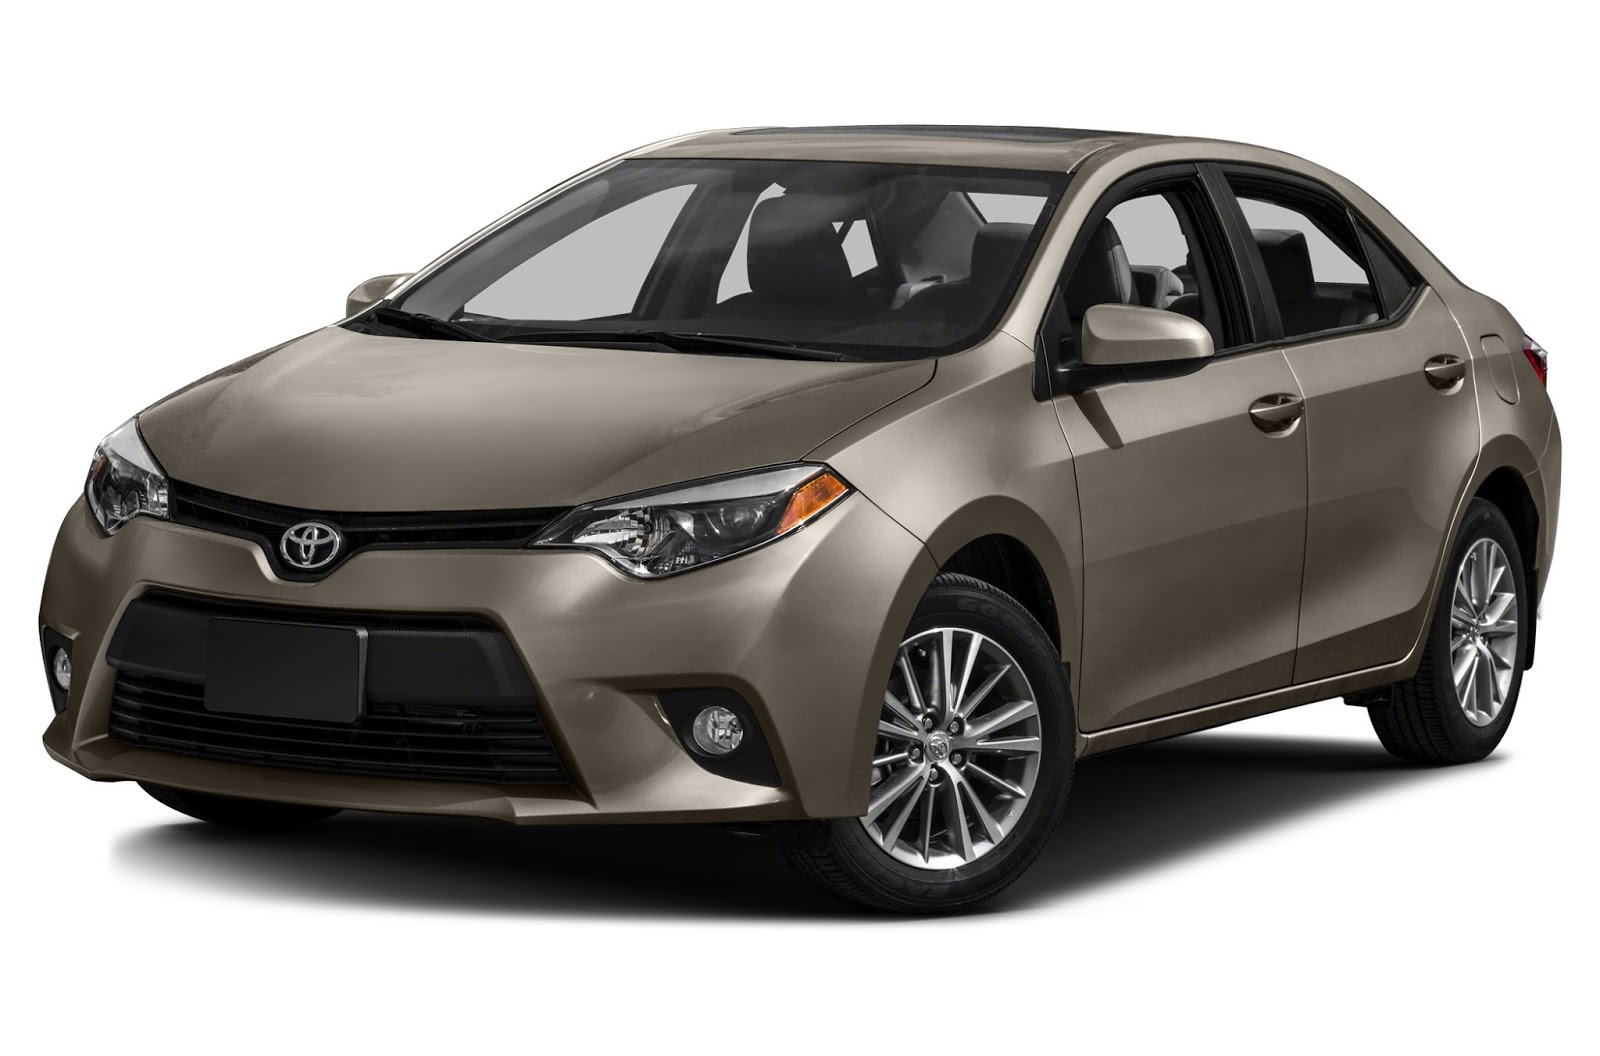 All types of auto information.: Toyota corolla